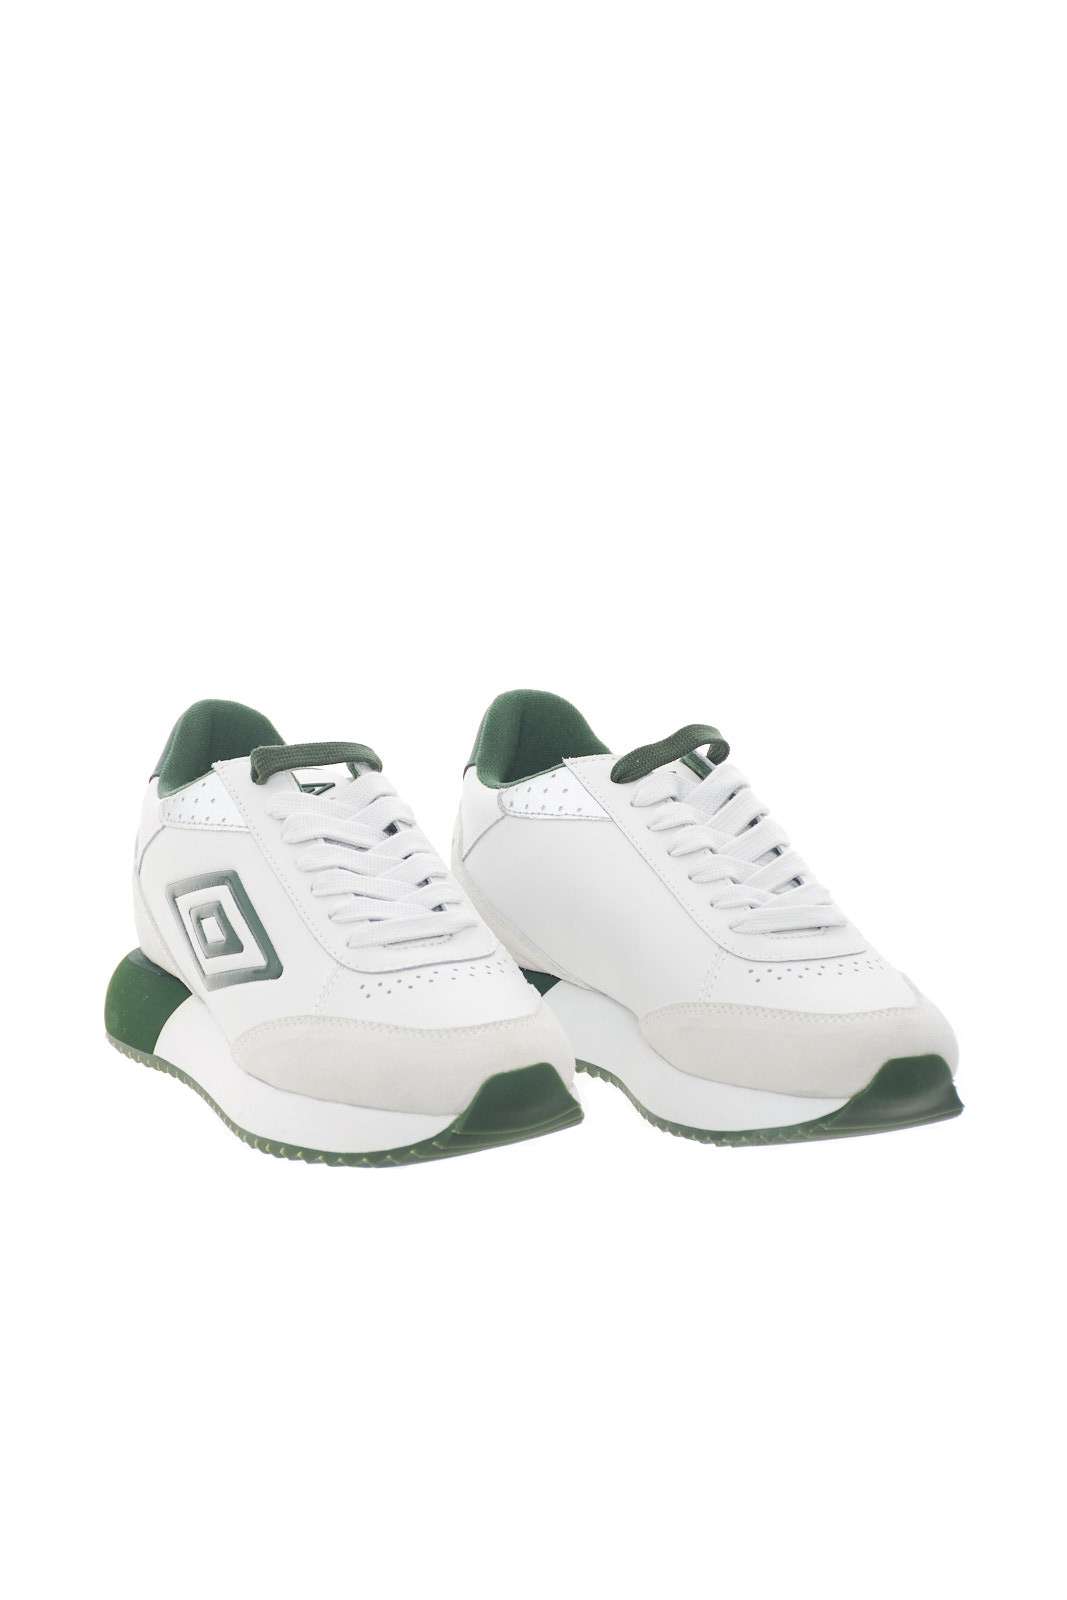 Umbro Women's Sneakers with colored logo